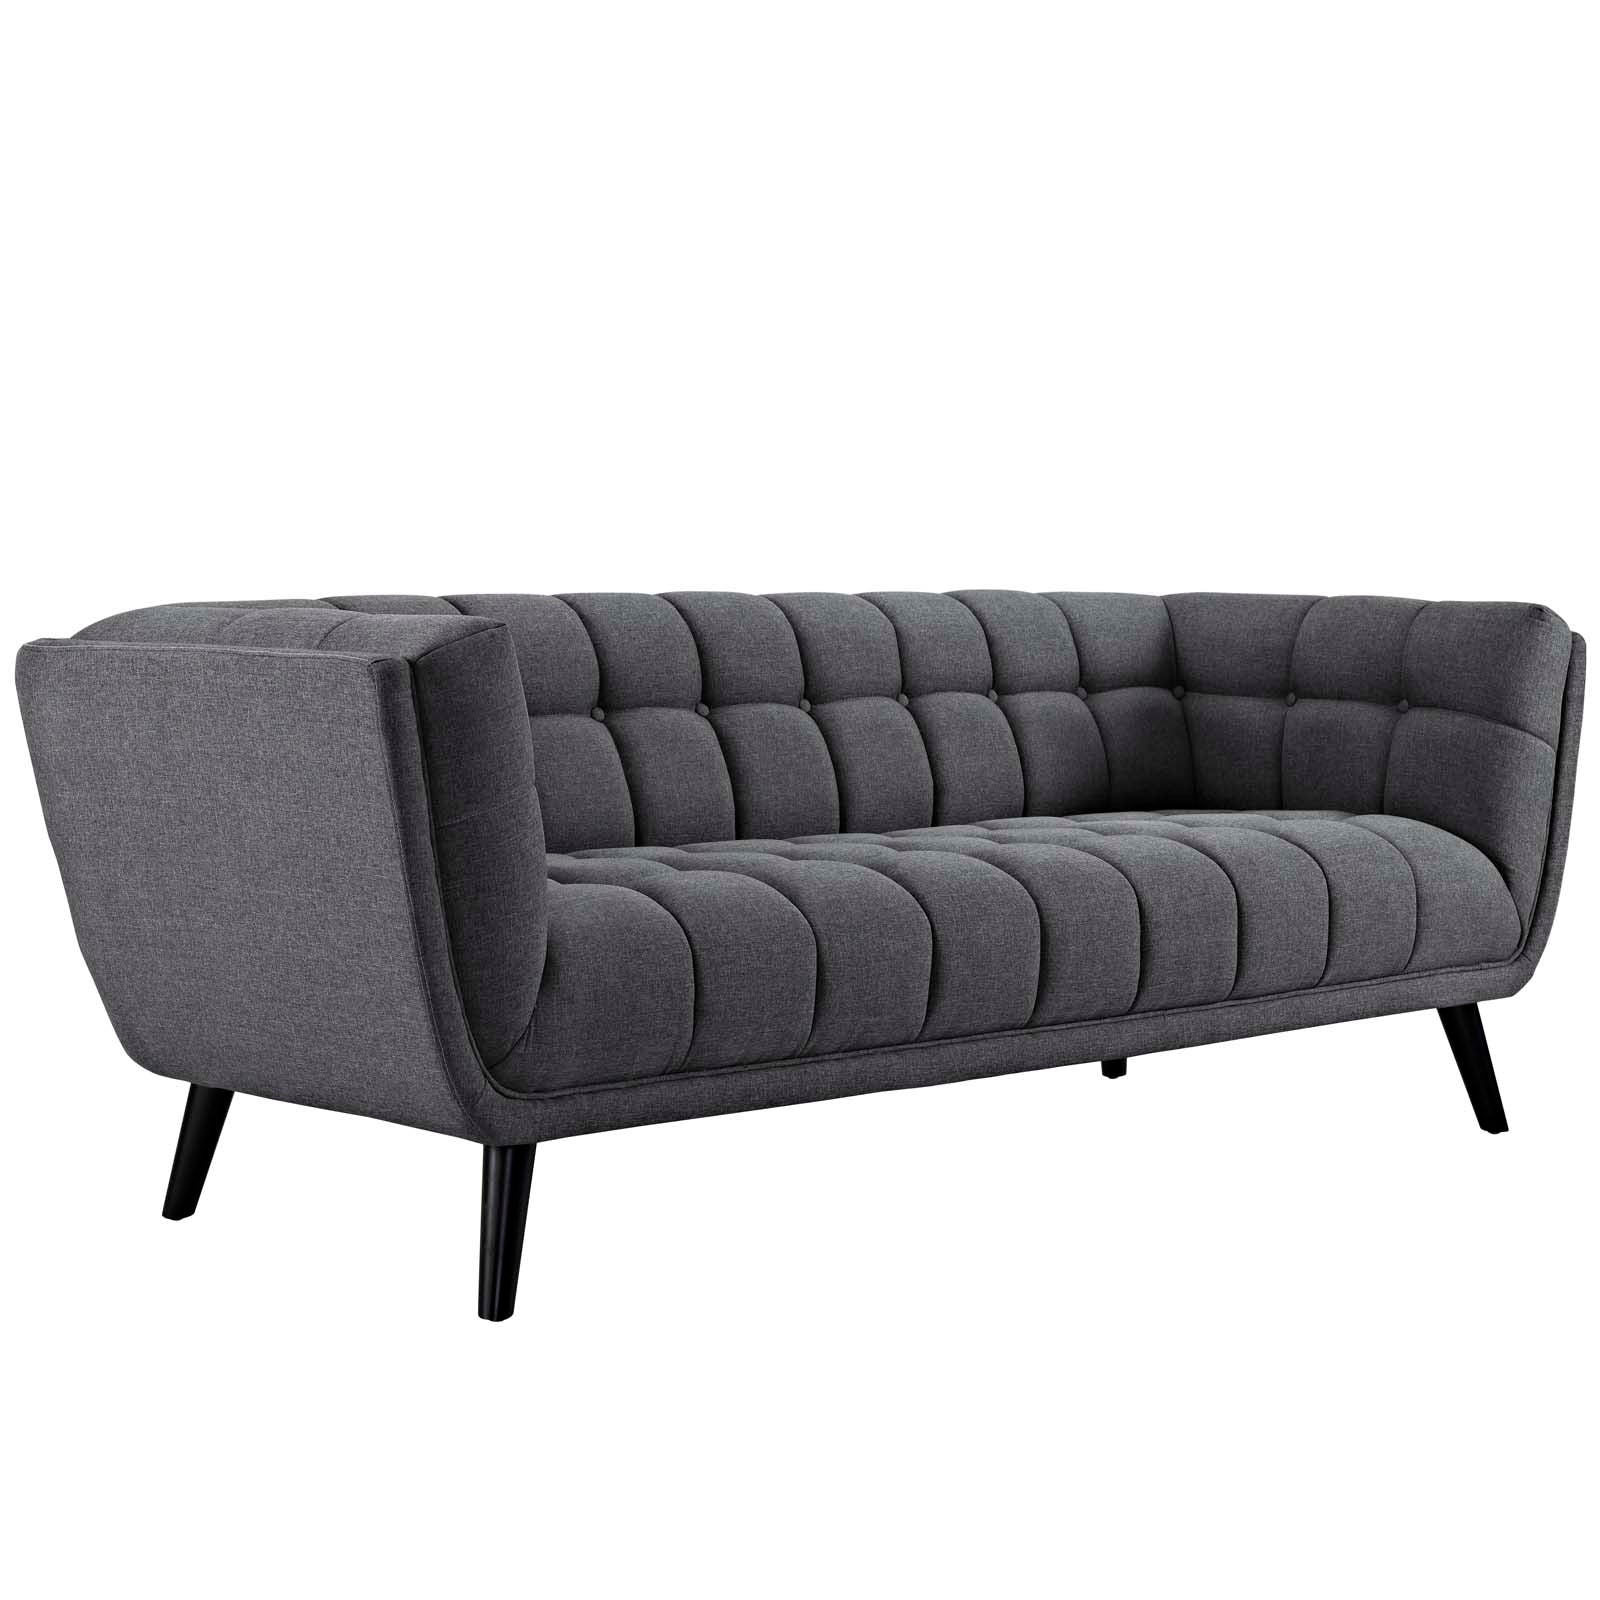 Modway Sofas & Couches - Bestow Upholstered Fabric Sofa Gray